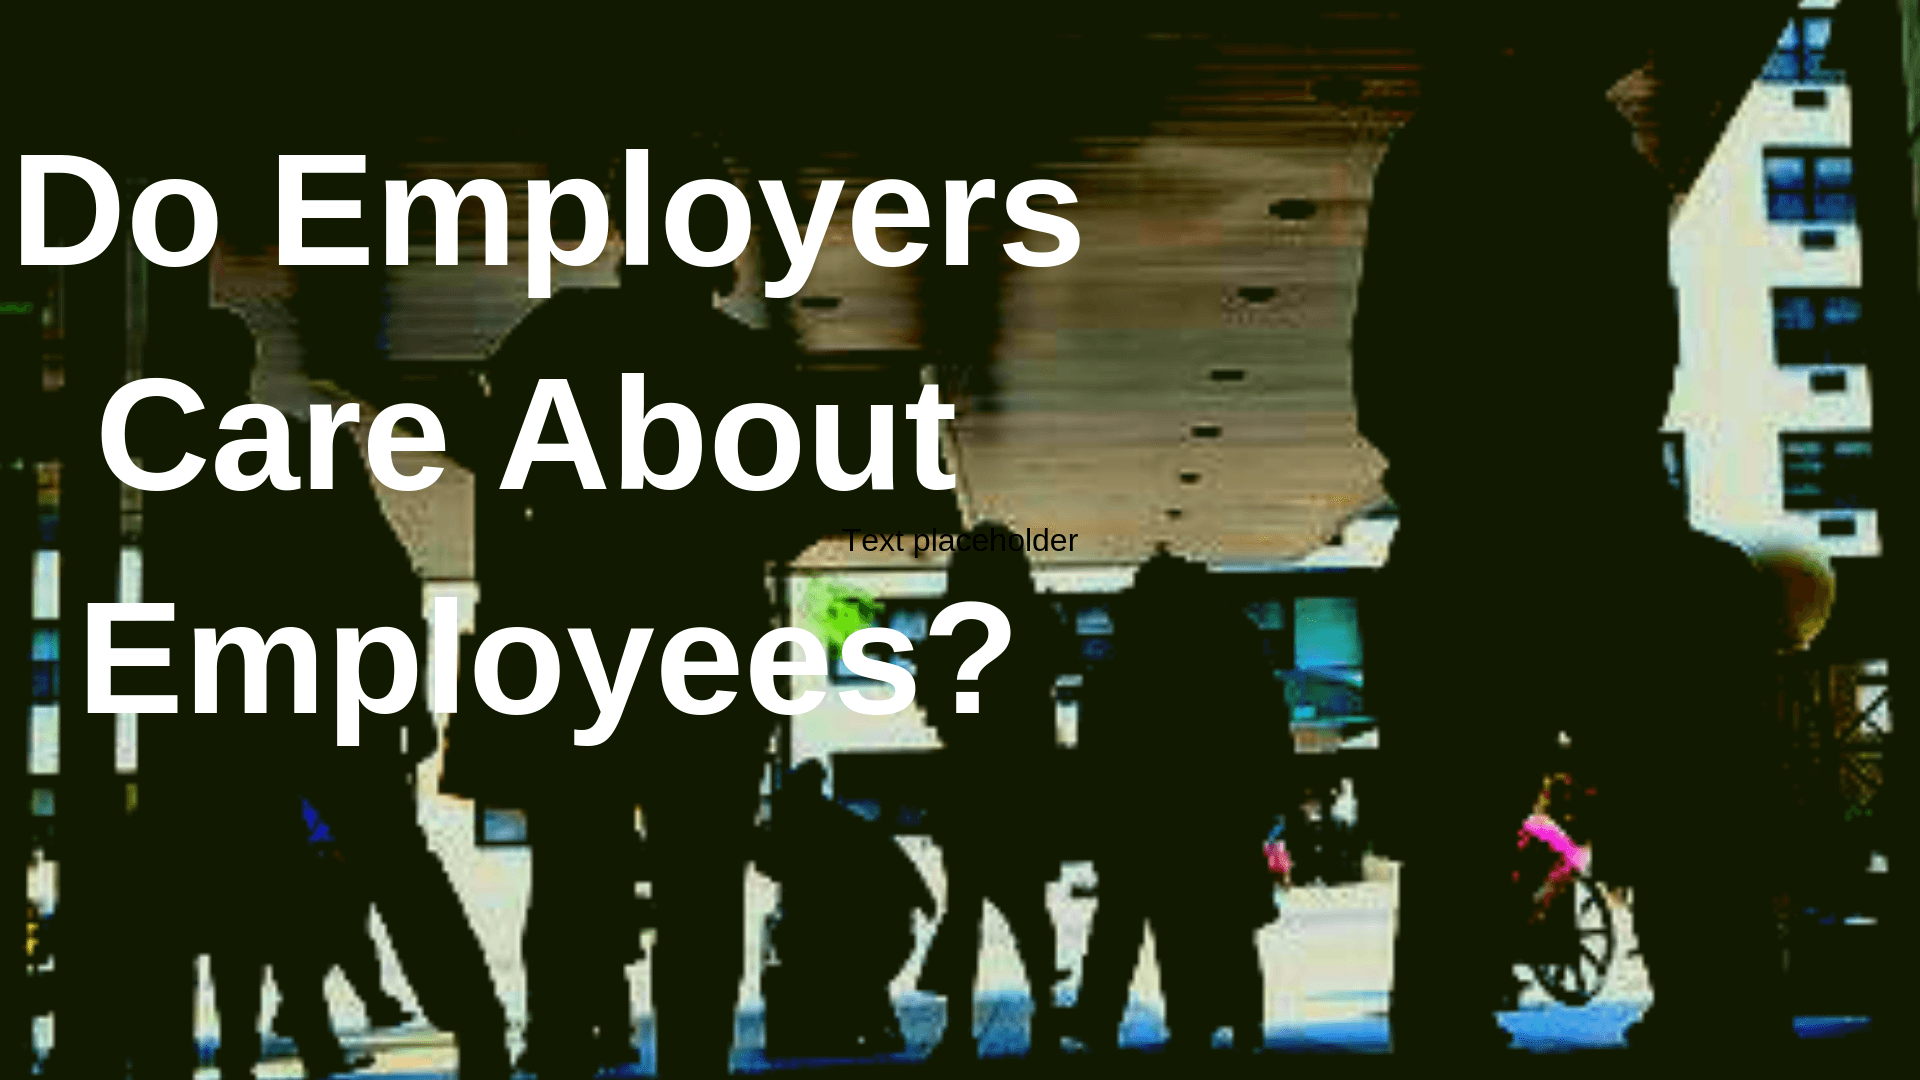 Do employers care about employees